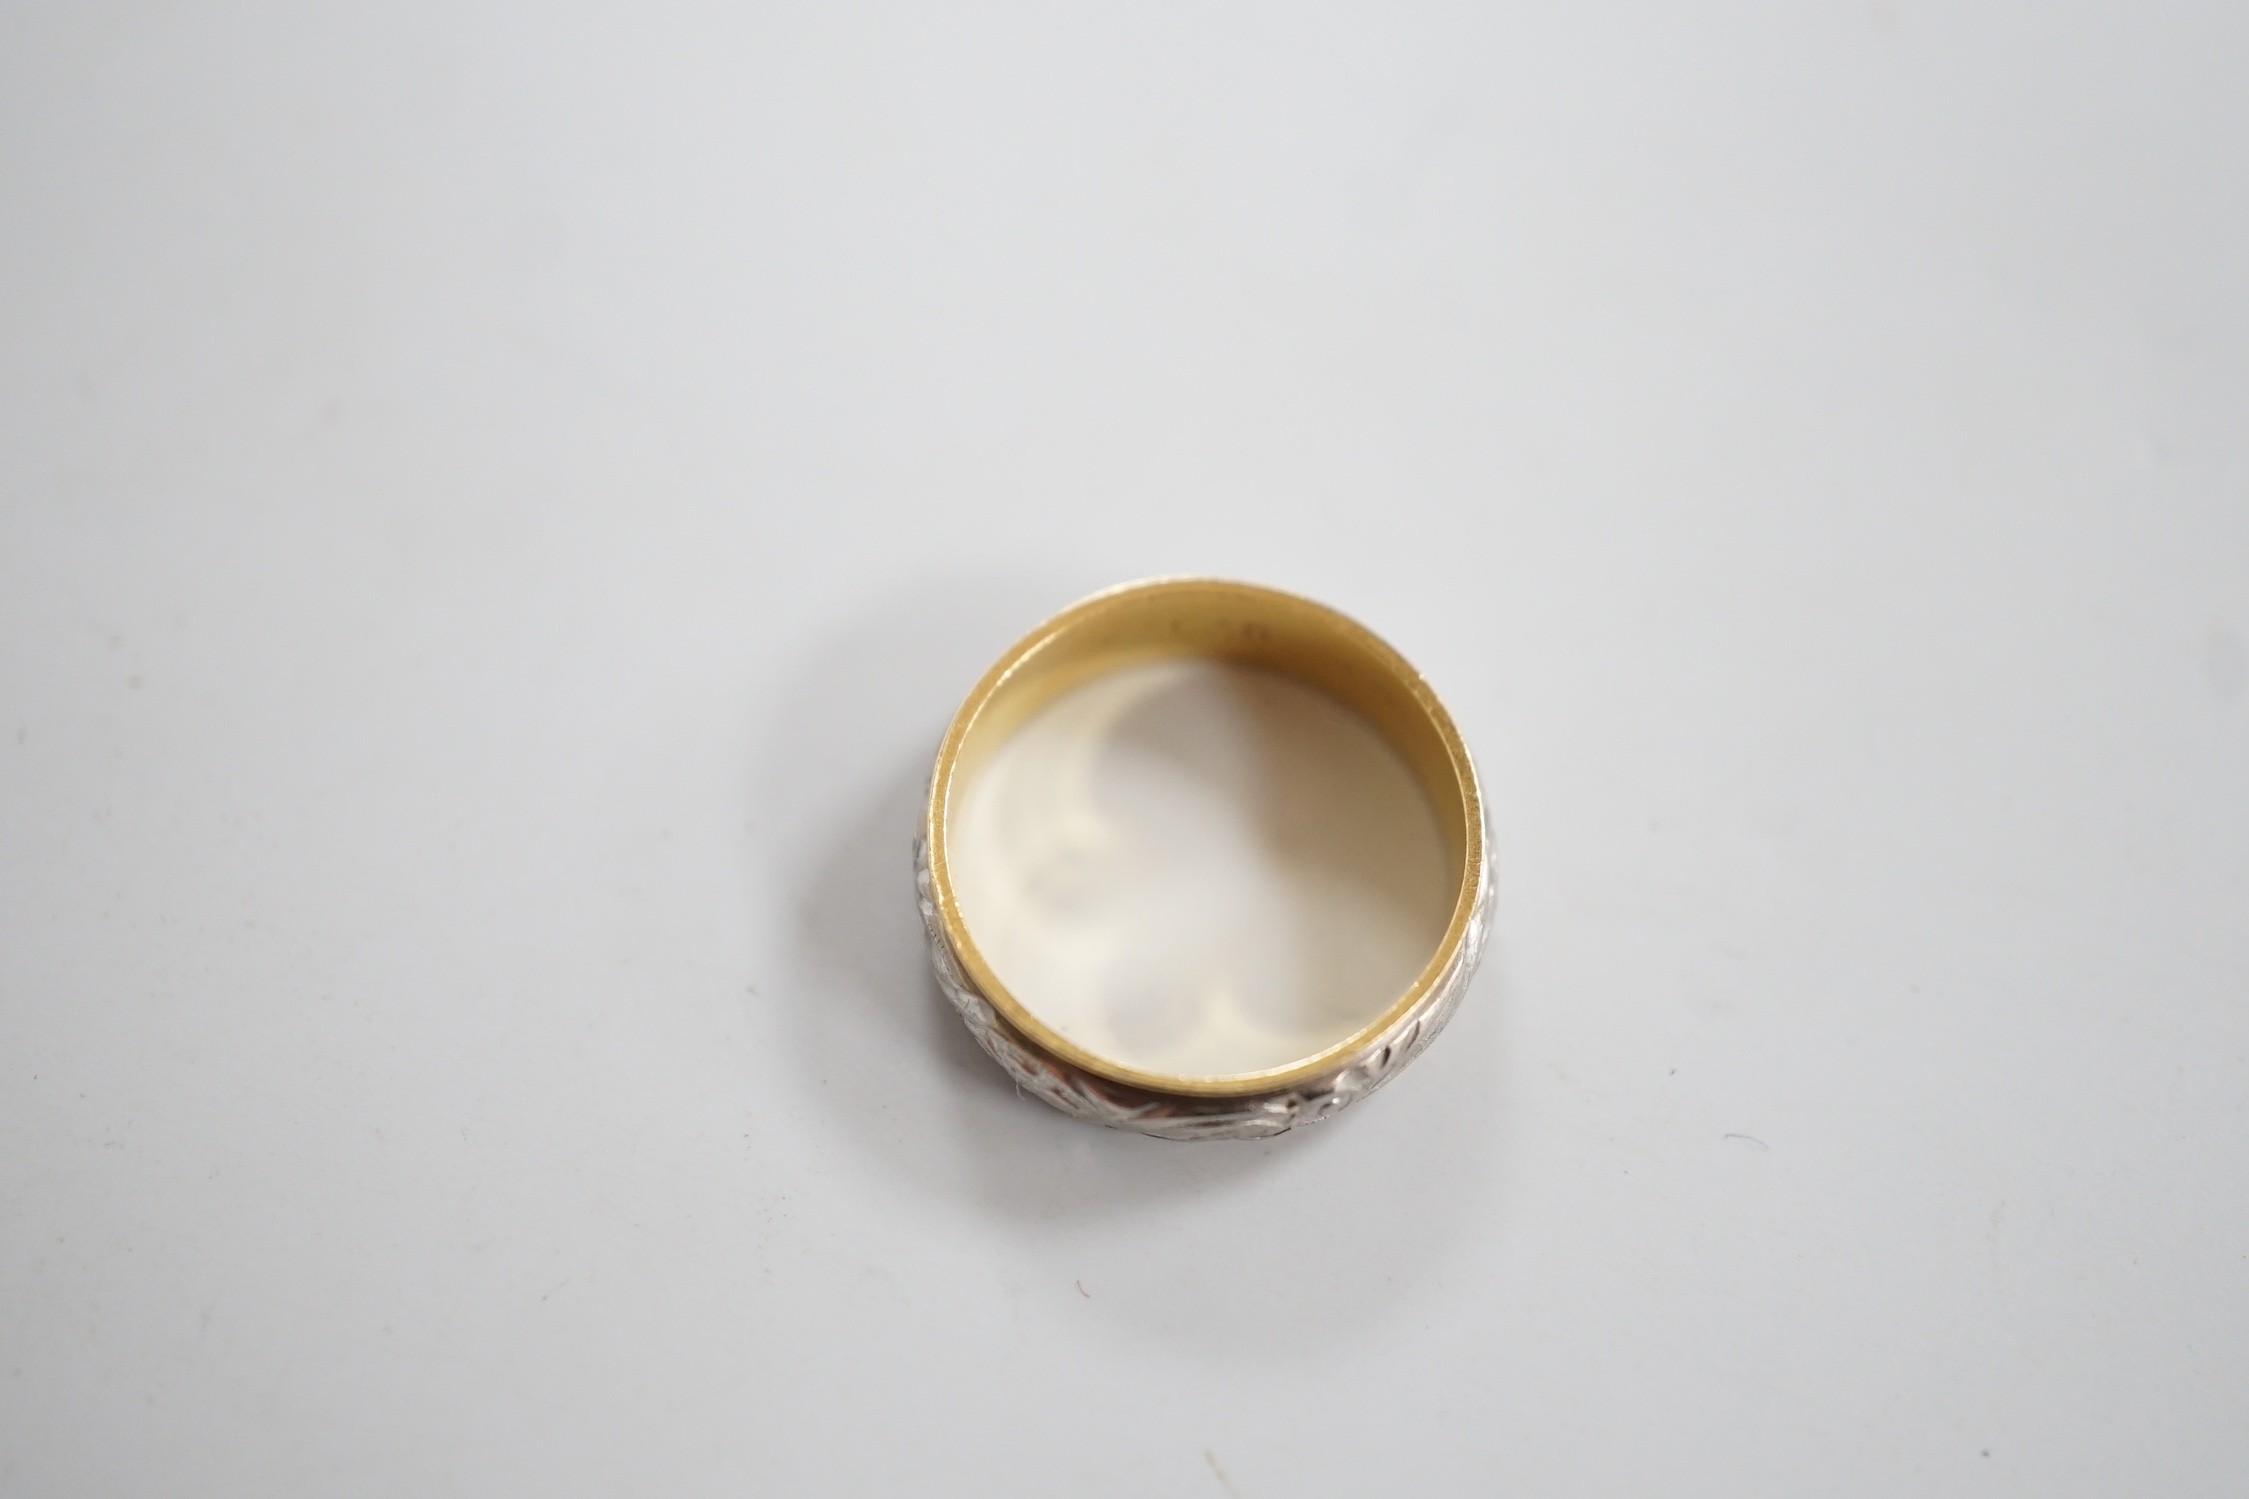 An engraved yellow and white metal band, size L, 3.7 grams.